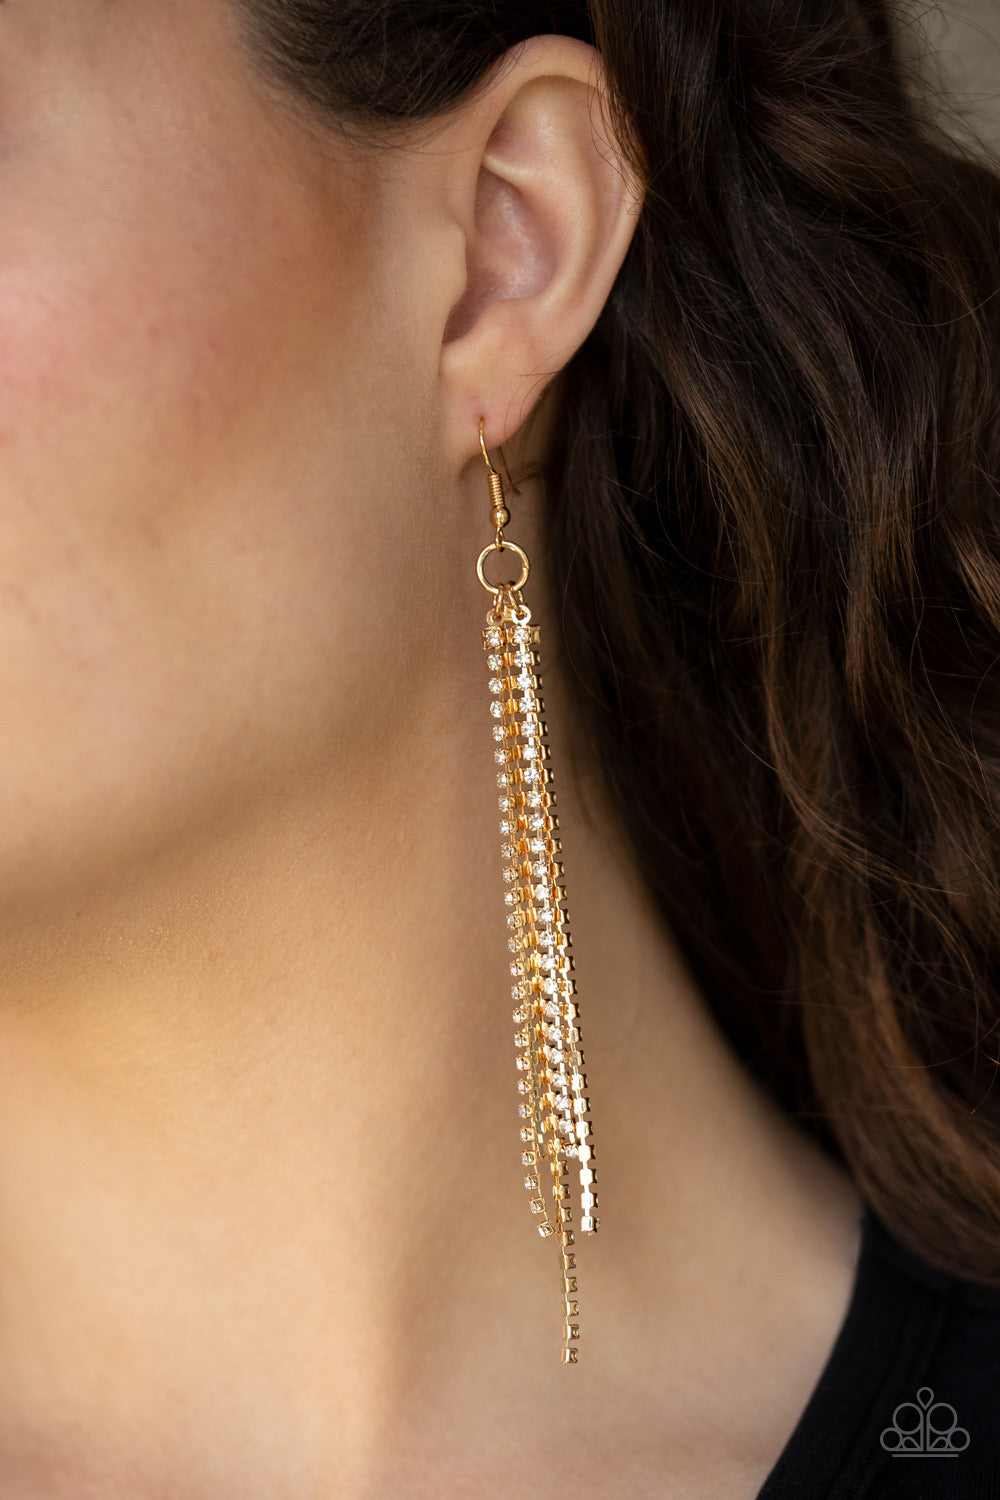 Center Stage Status Gold-Earrings